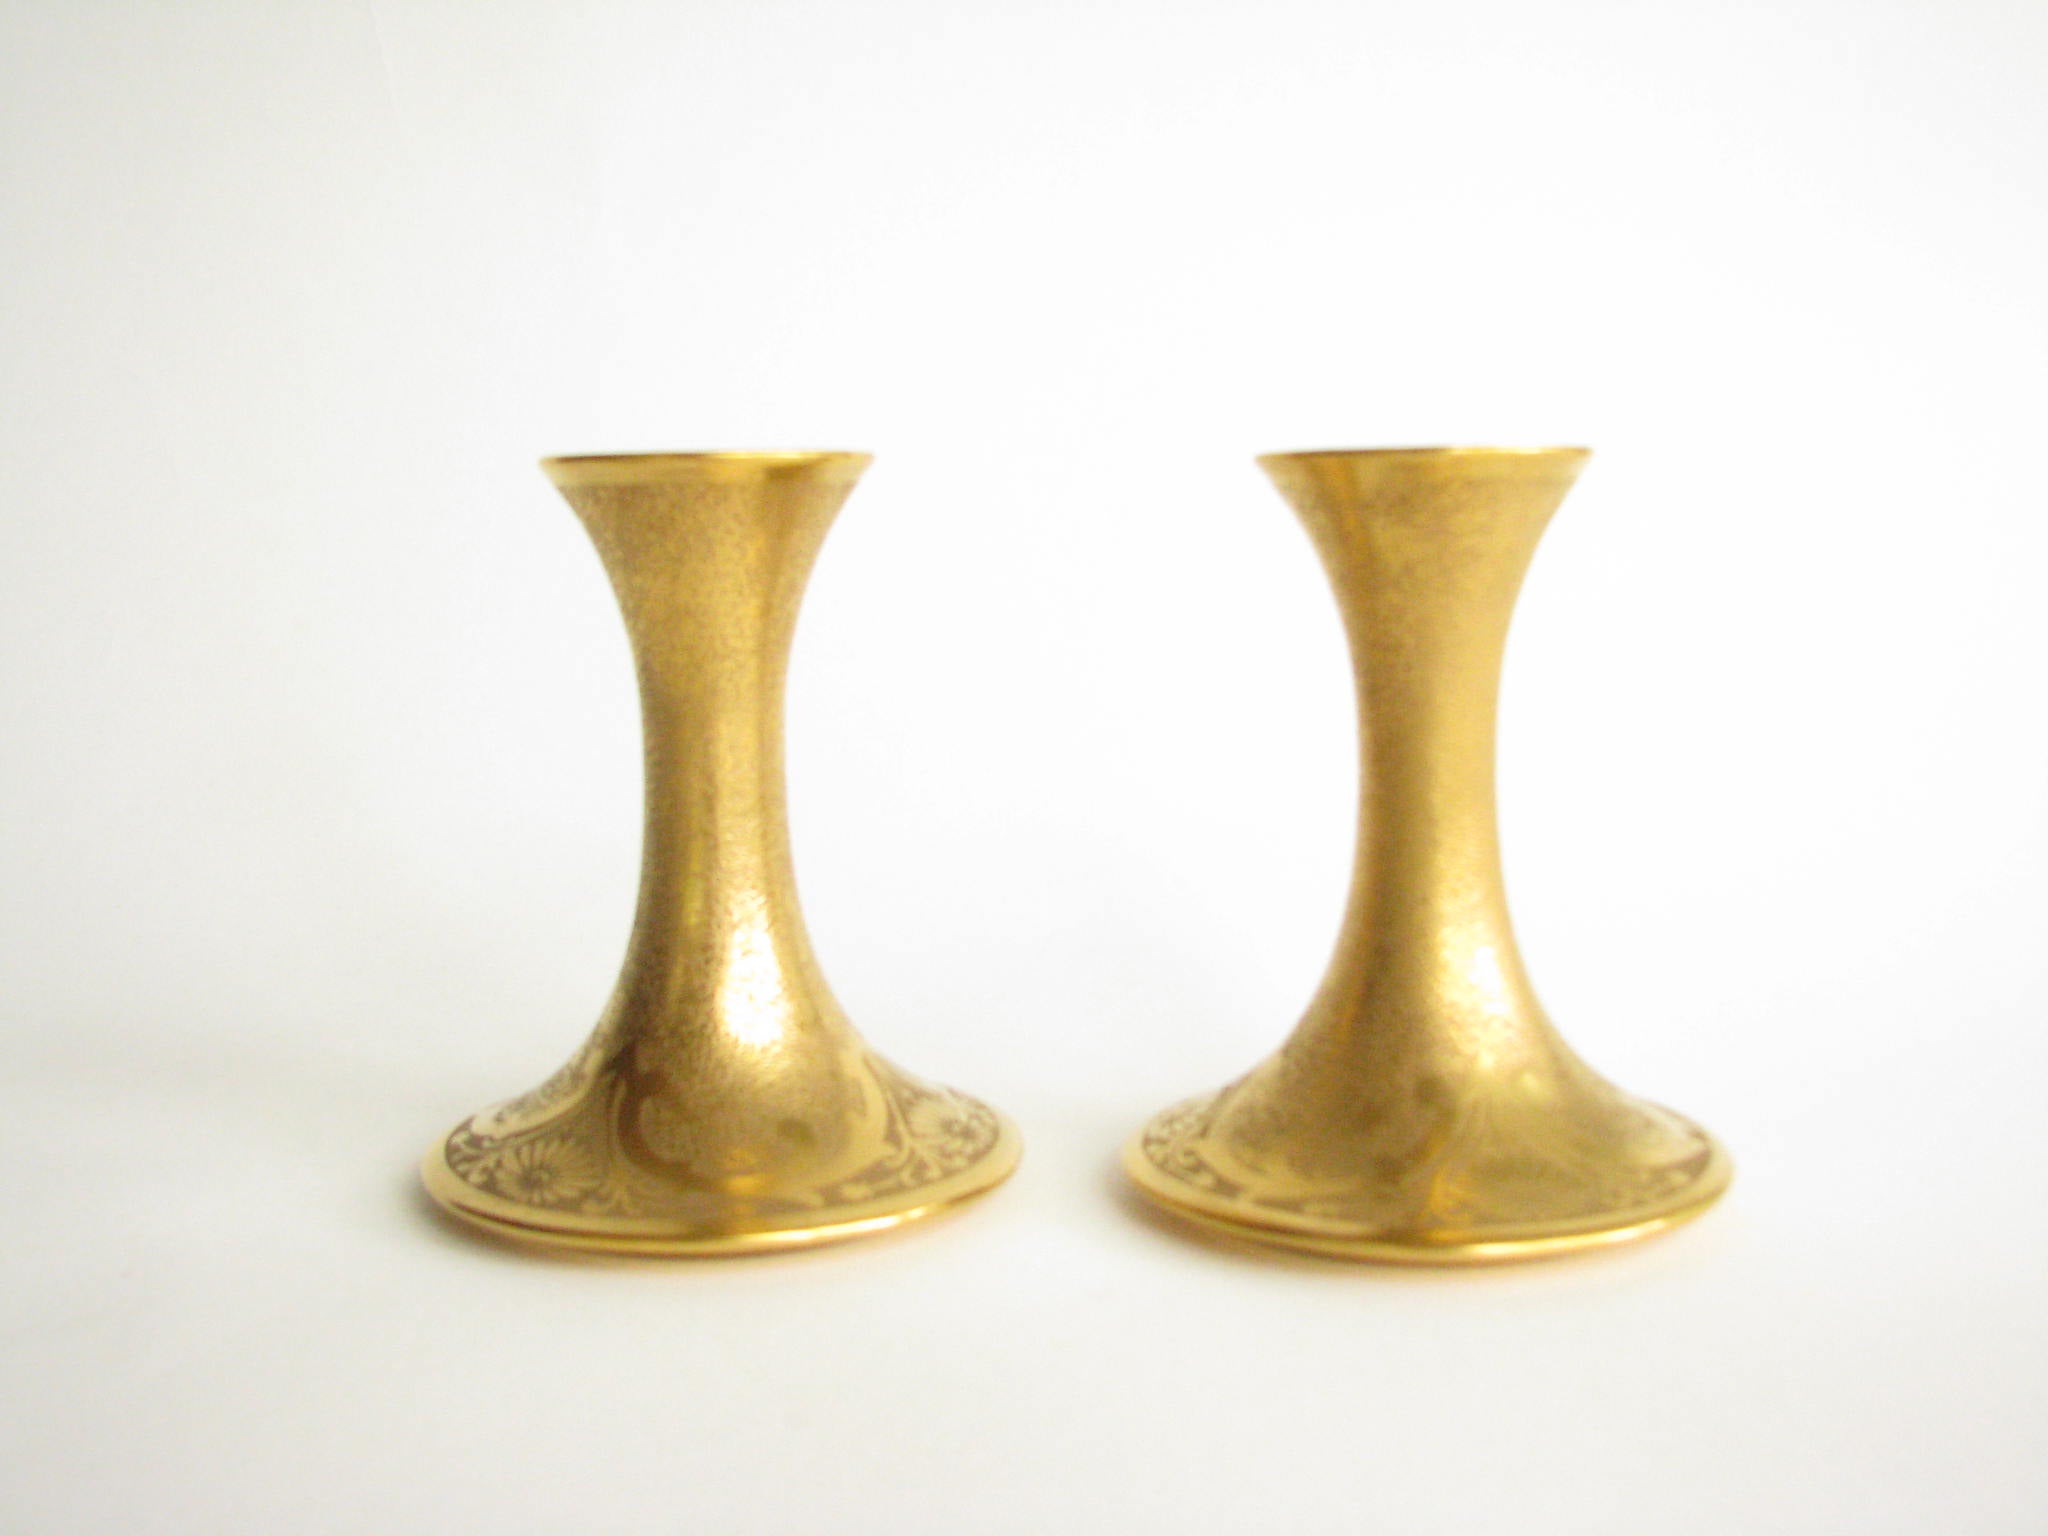 edgebrookhouse - Antique T&V Limoges Gilted Porcelain Candlesticks Hand Decorated by A.W. Steiner - a Pair